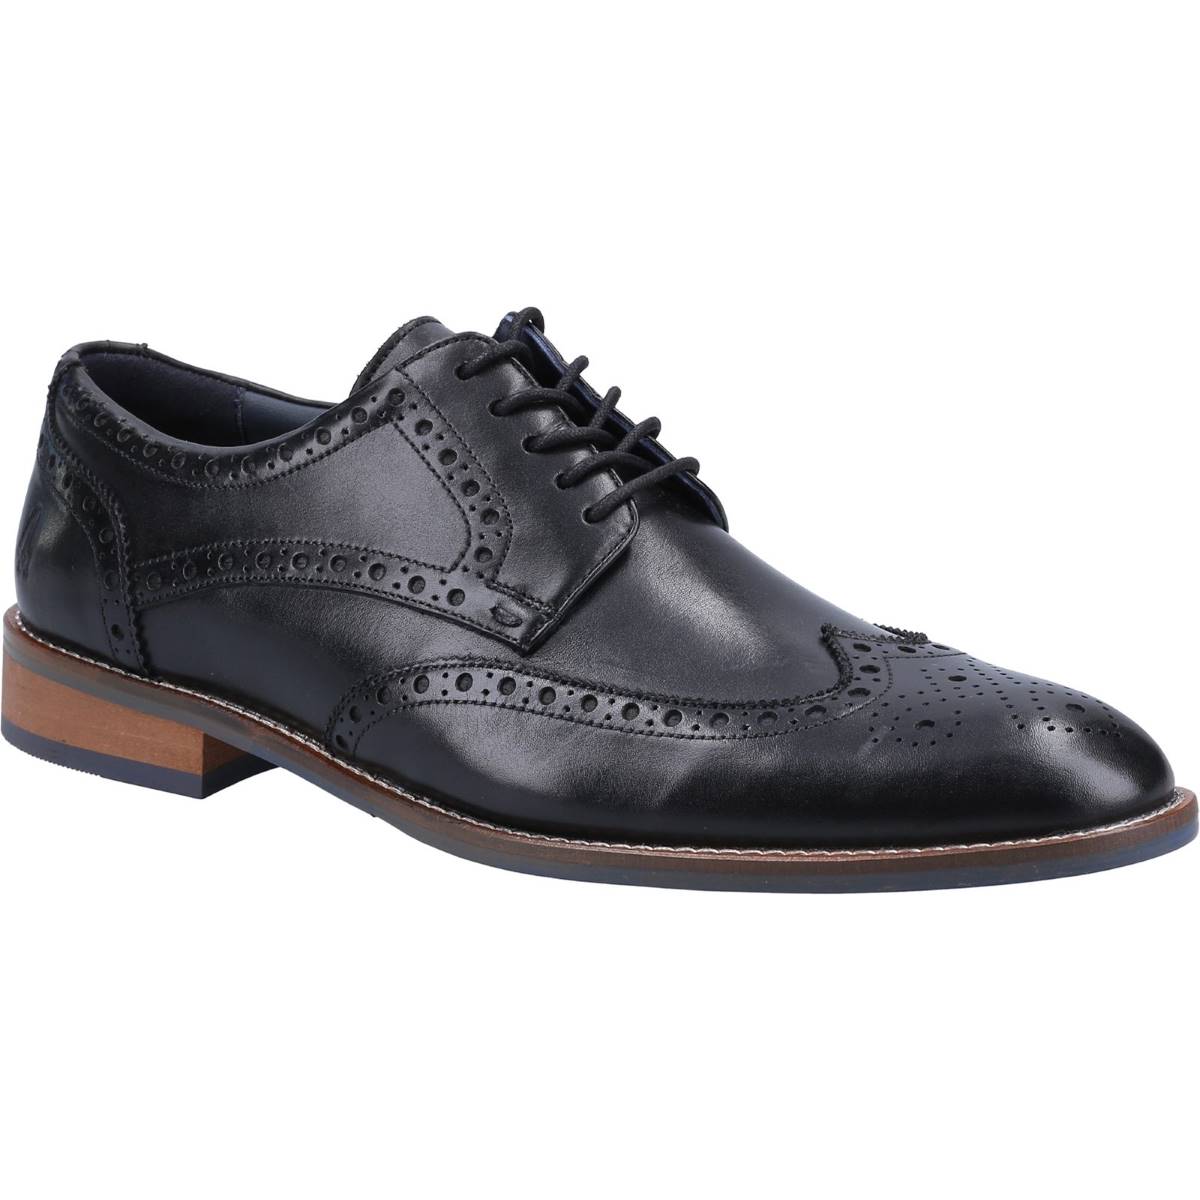 Hush Puppies Dustin Brogue Black Mens formal shoes HP-36819-68803 in a Plain Leather in Size 11